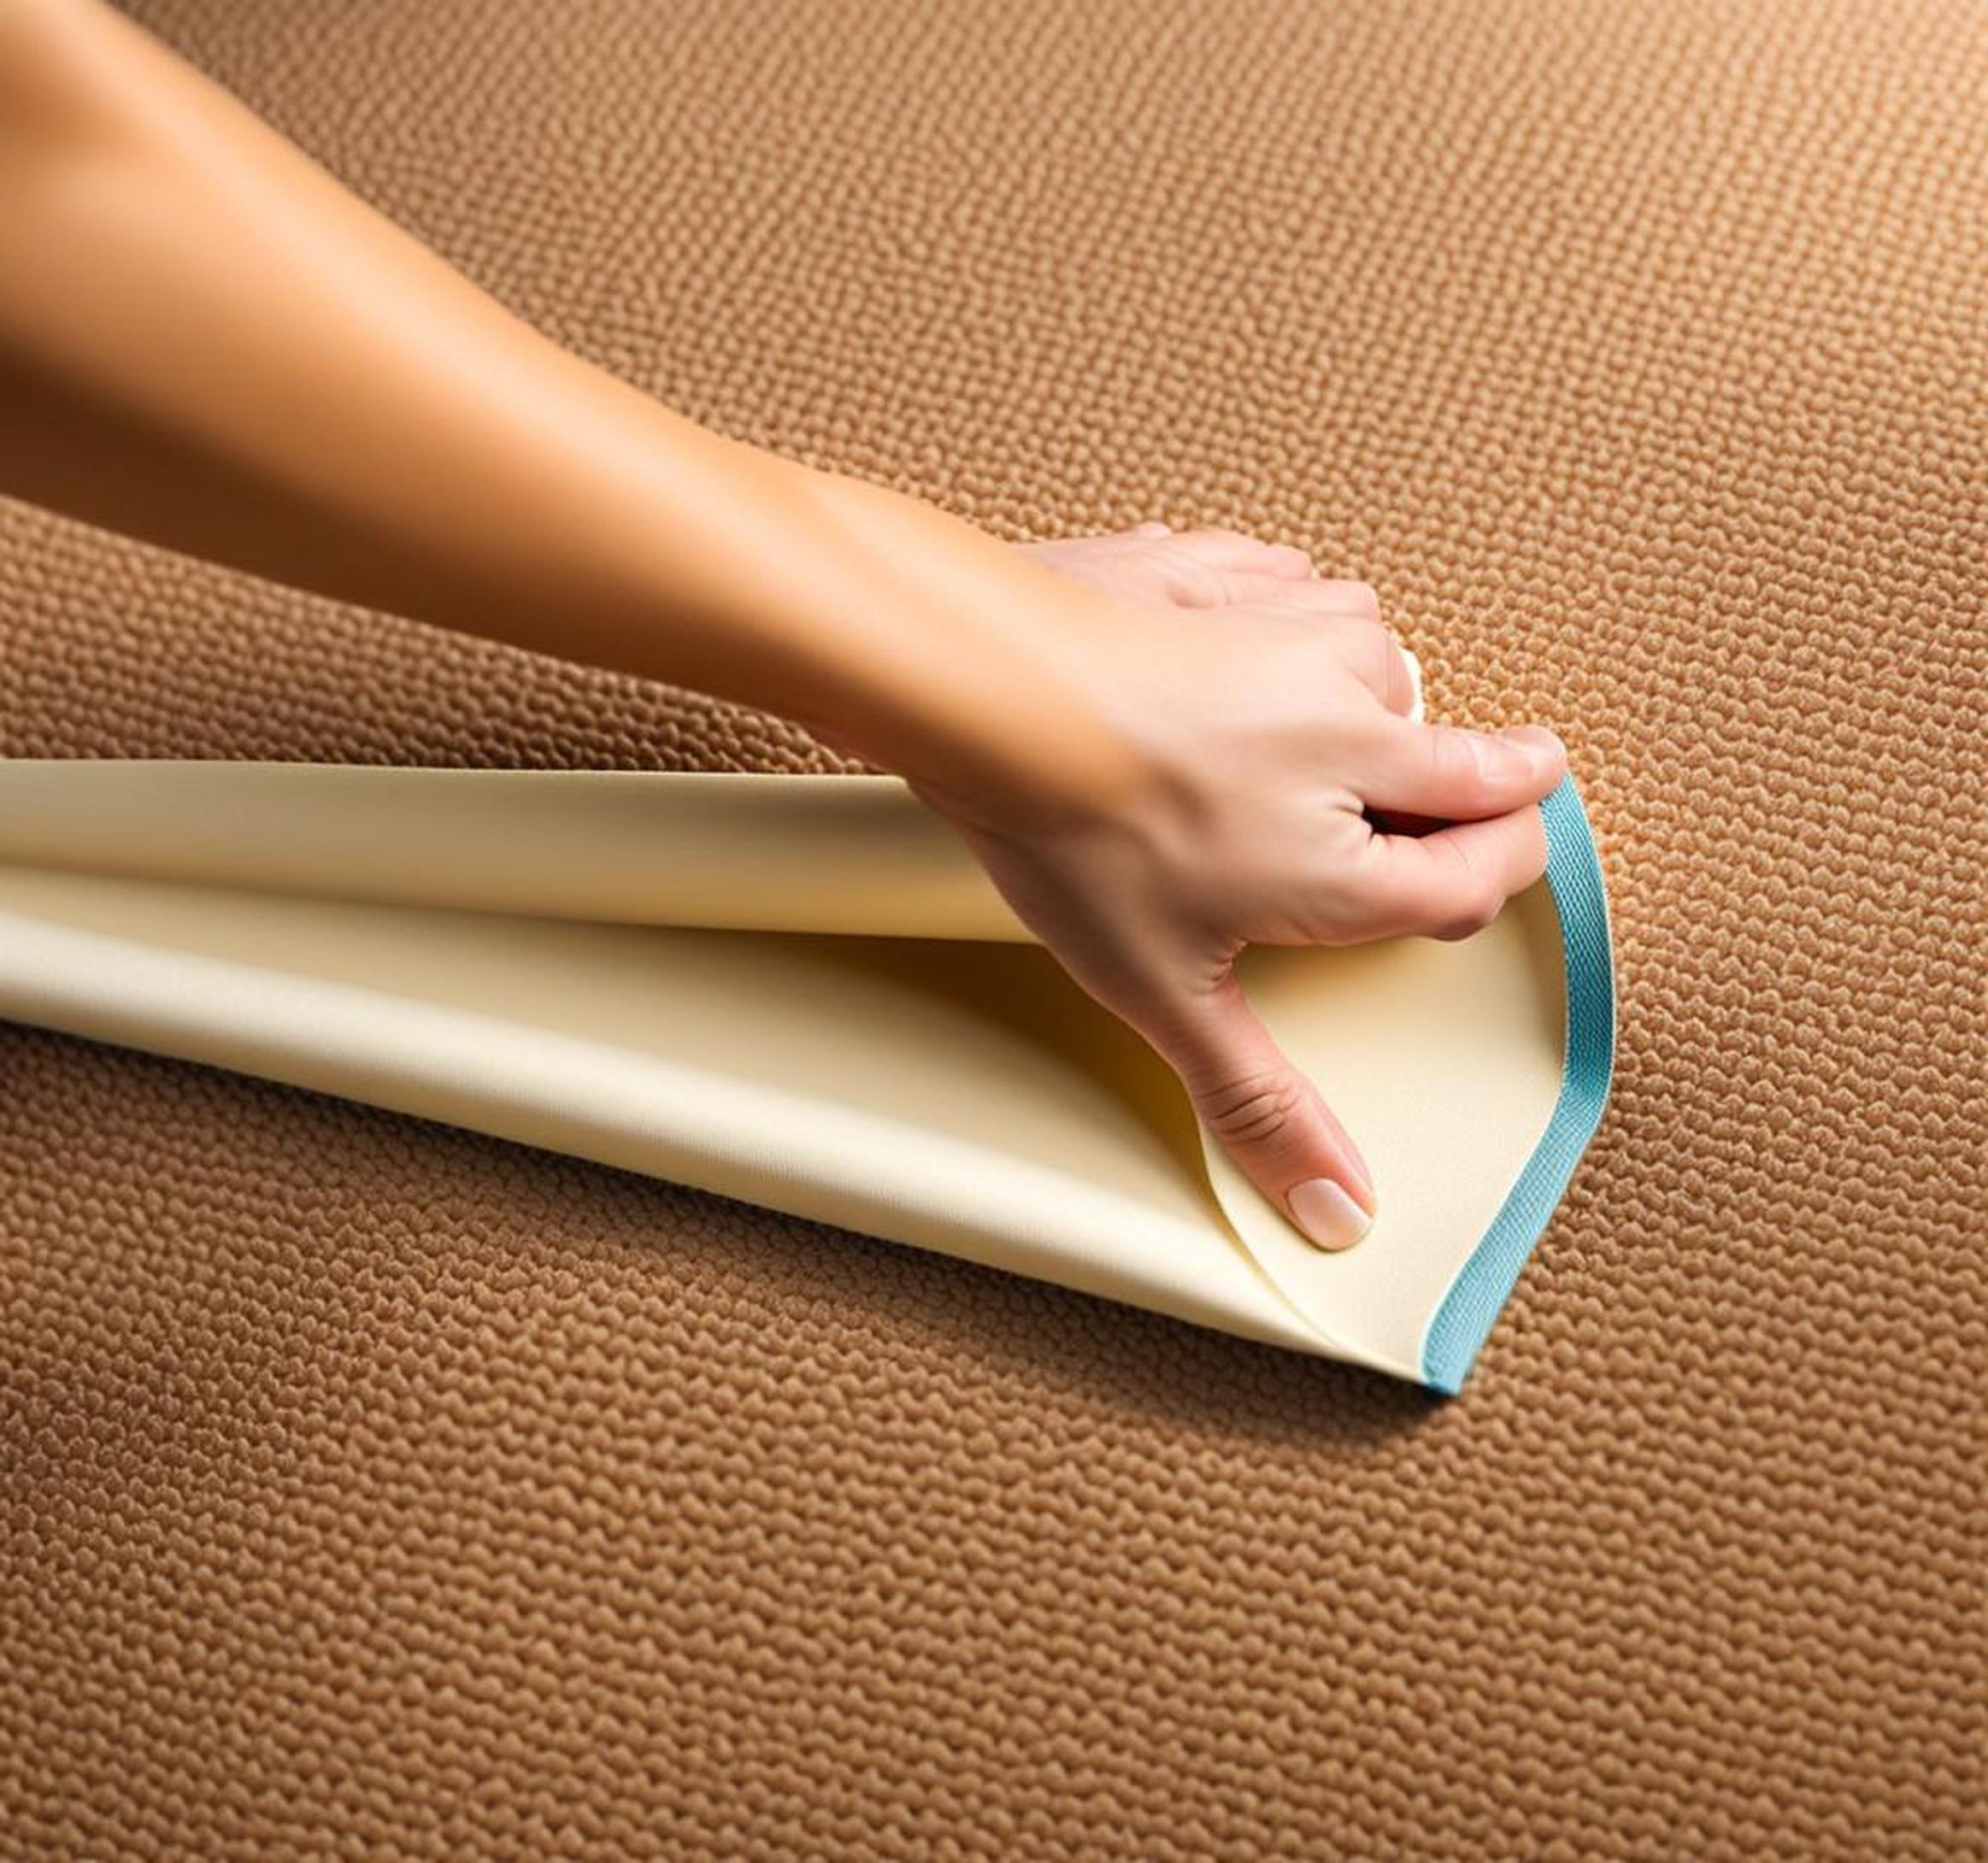 how to get wrinkles out of carpet without a stretcher